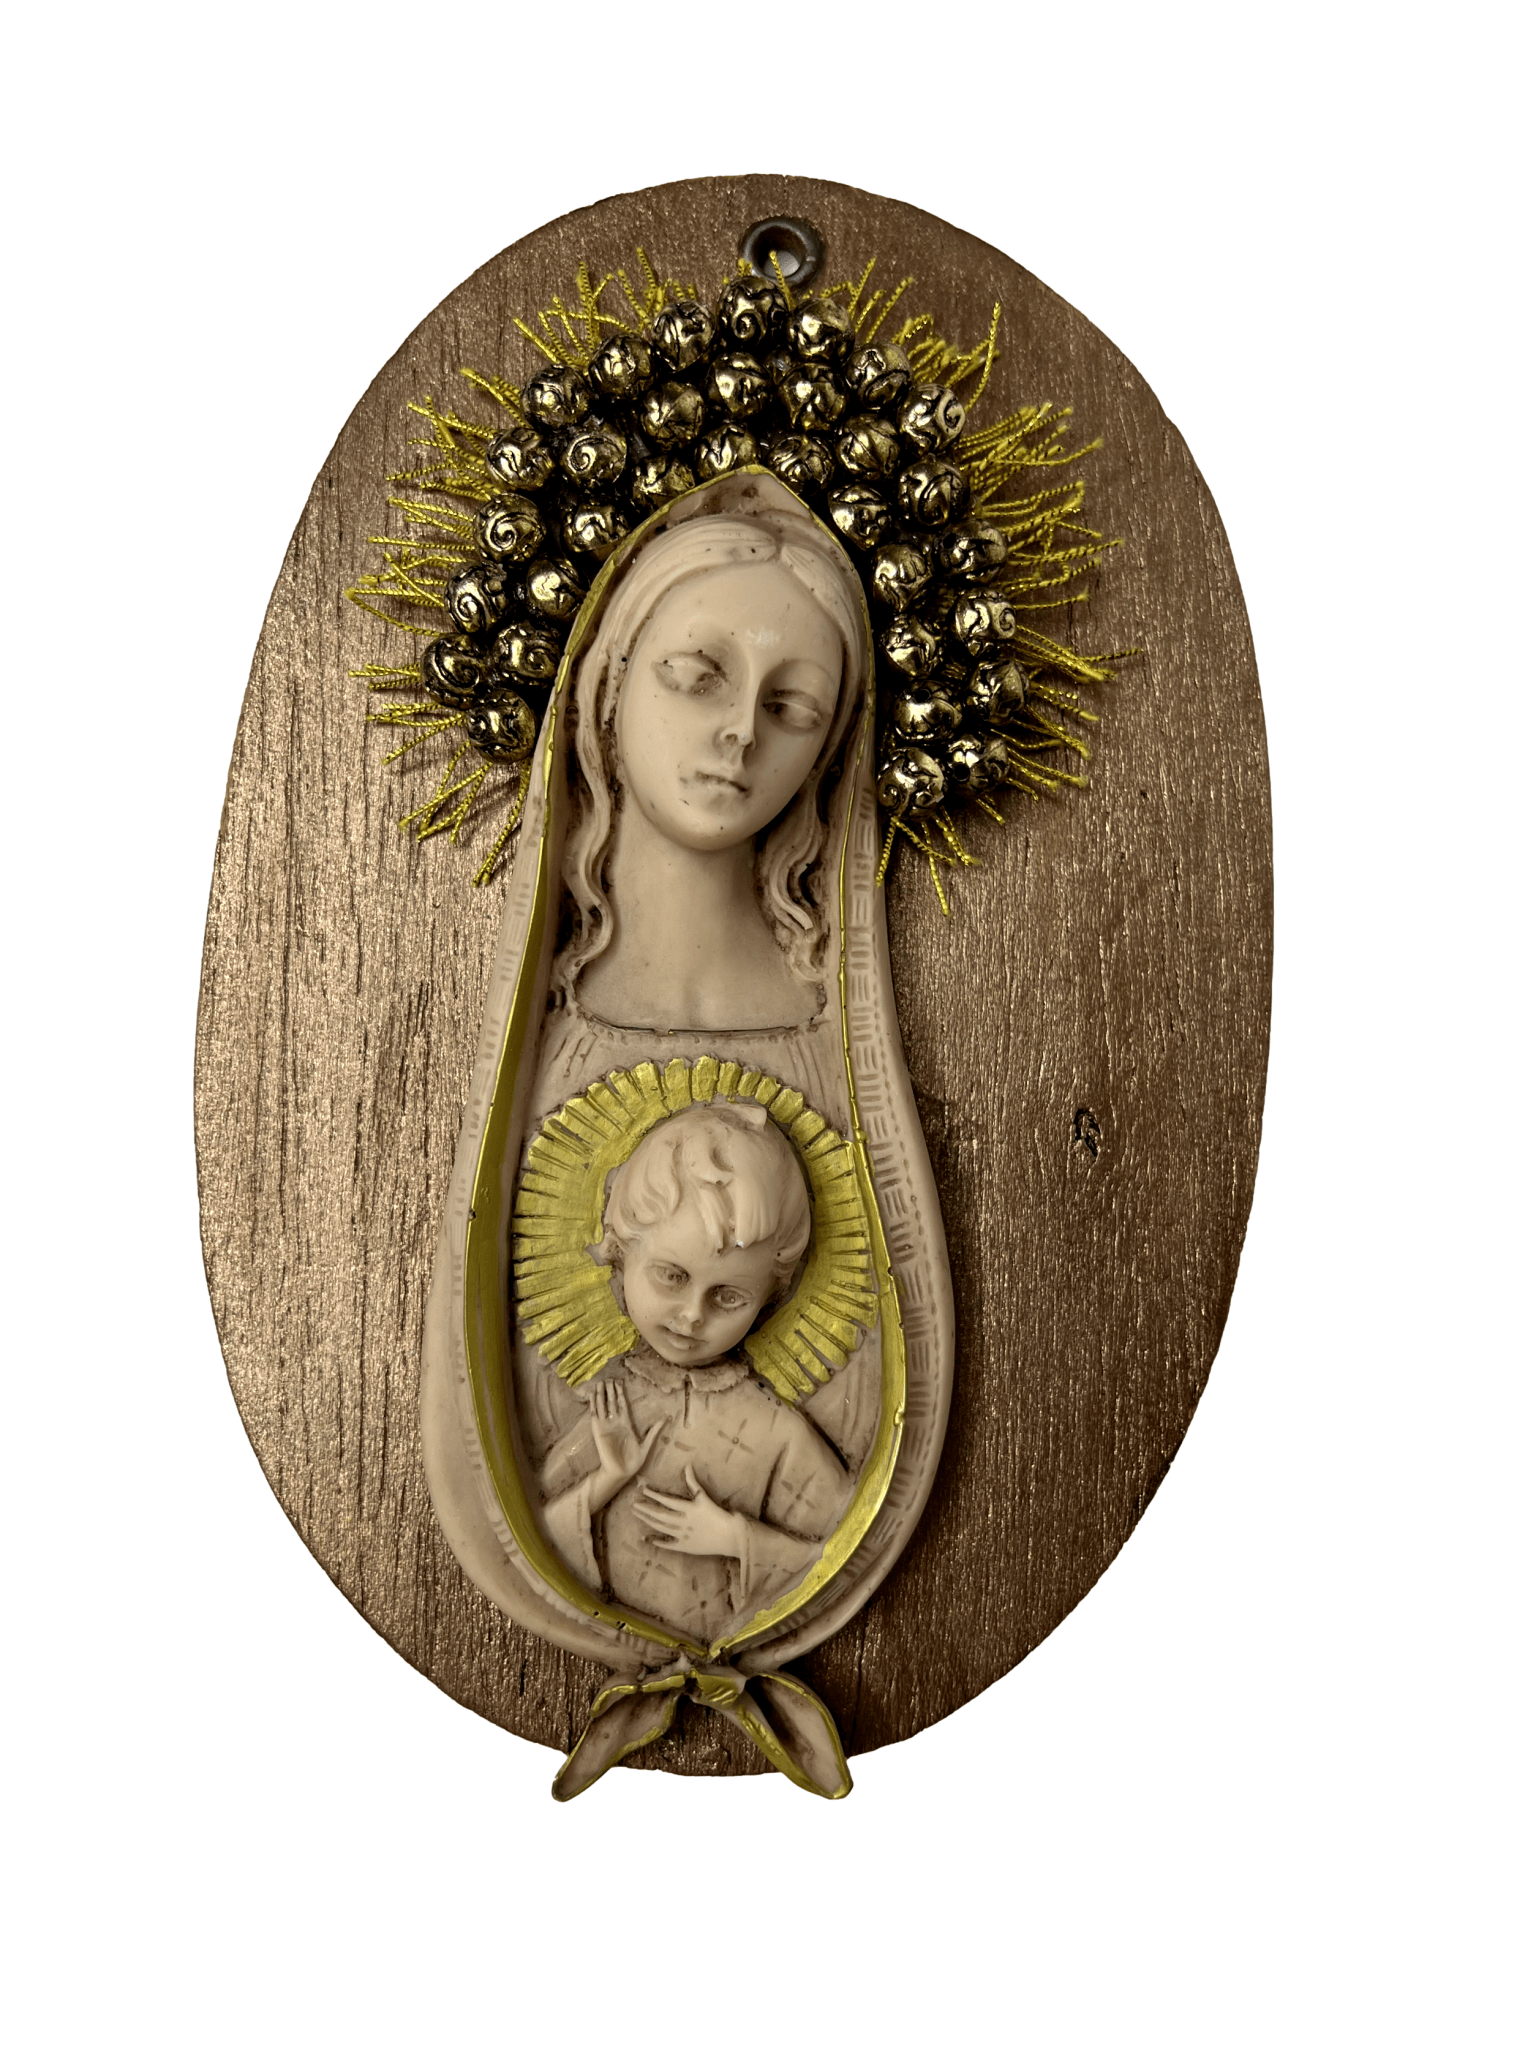 Madonna and Child Alabaster Gold Crown Jewelry Bead Embellishment On Wood Handcrafted By Local El Paso Artist L:9 inches W:6 inches - Ysleta Mission Gift Shop- VOTED El Paso's Best Gift Shop